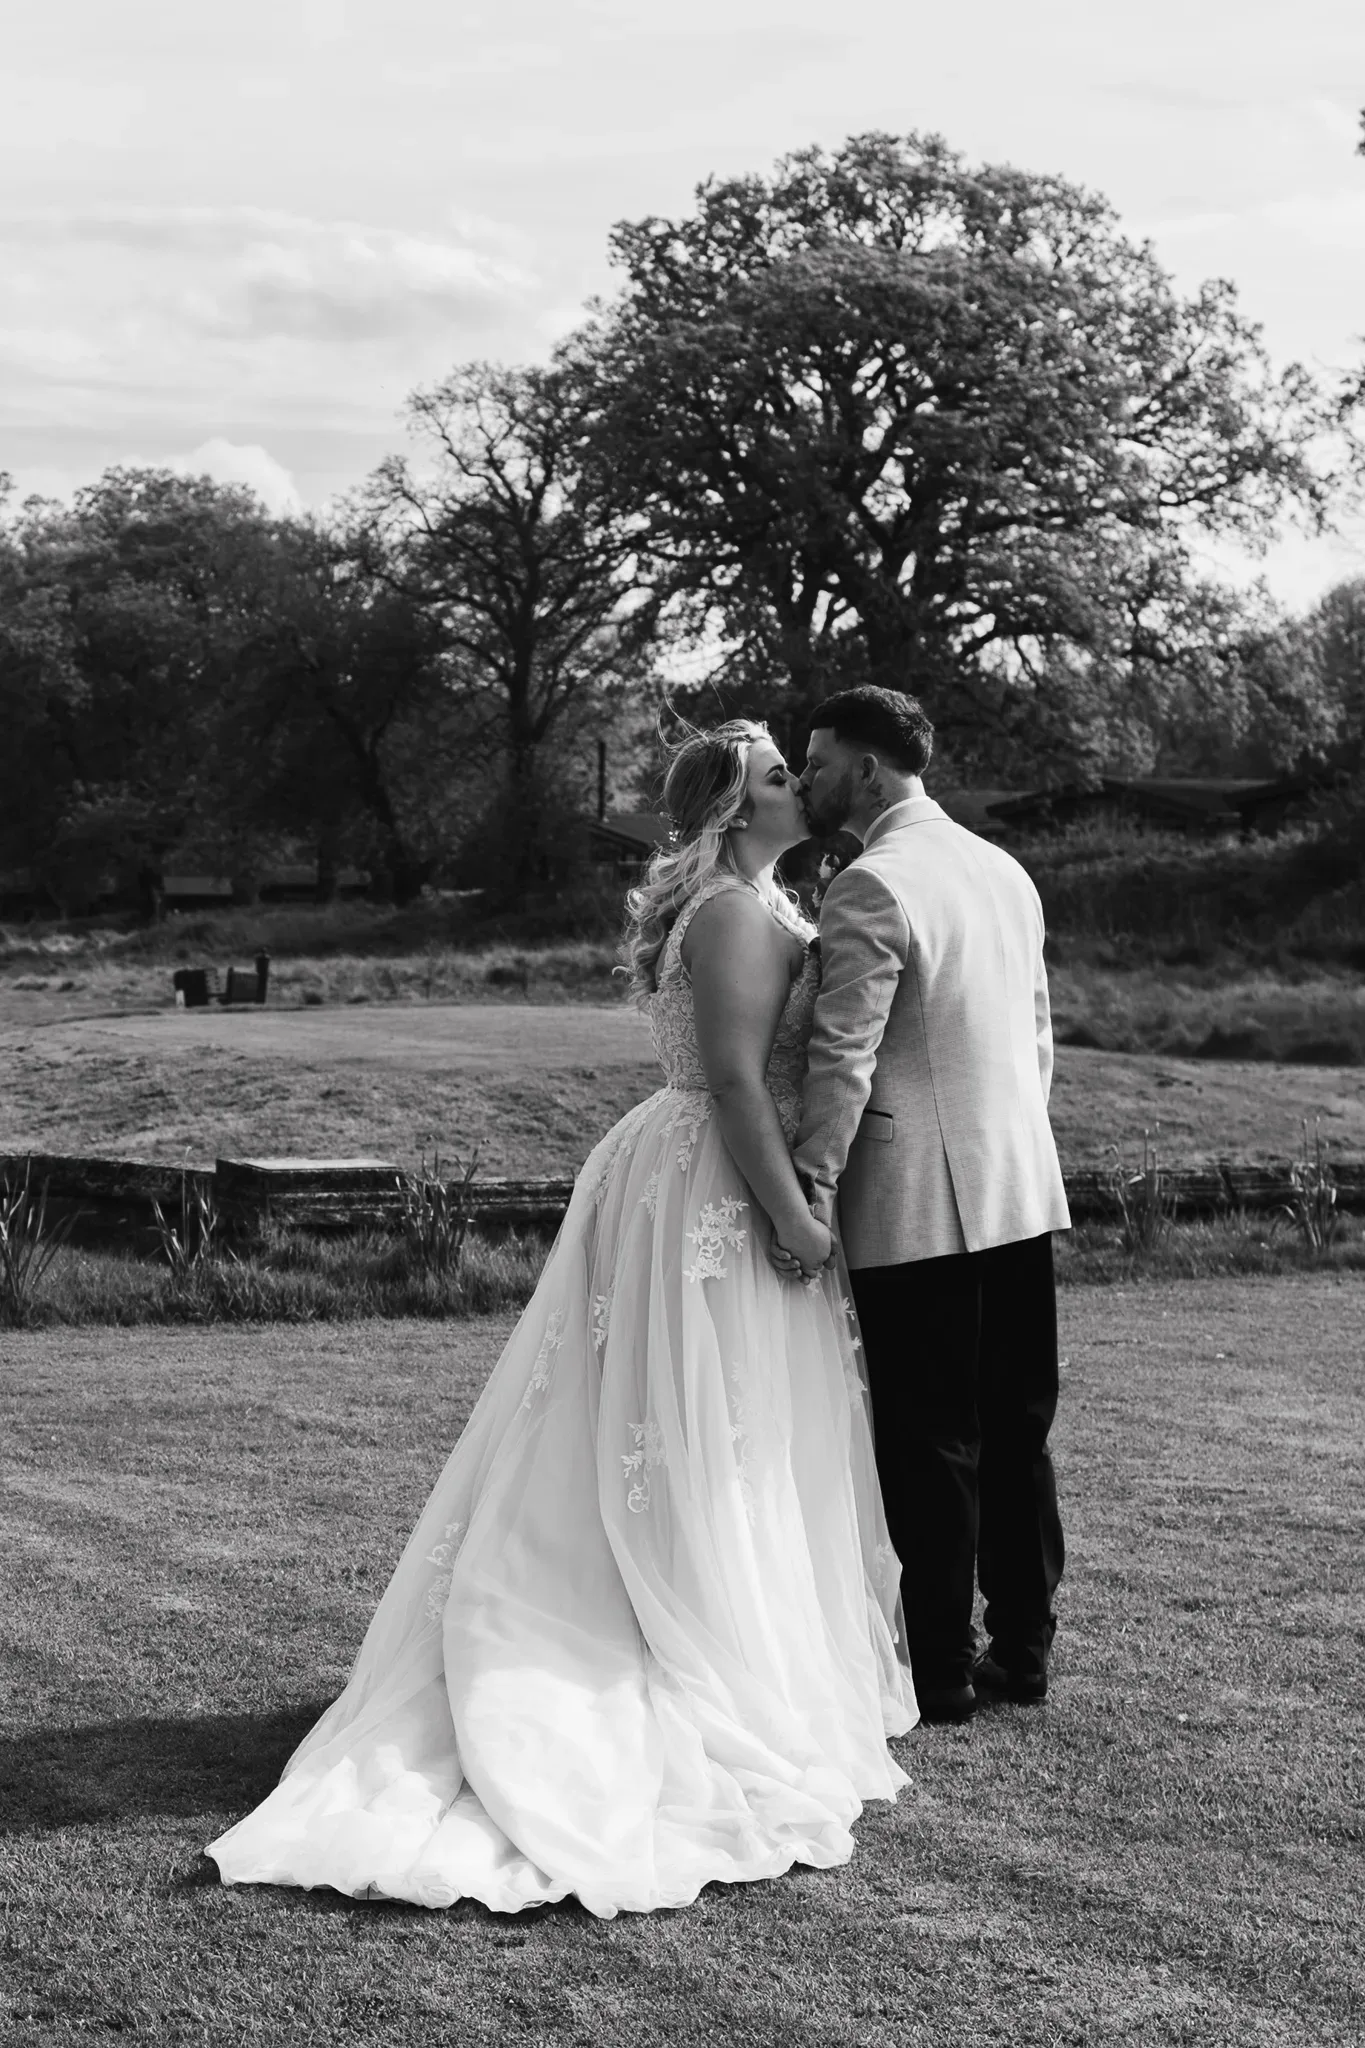 A black and white image of a bride and groom sharing a kiss outdoors. the bride, in a long flowing gown, stands facing away, with the groom in a light suit leaning in for the kiss. serene natural background with a leafy tree and pasture.